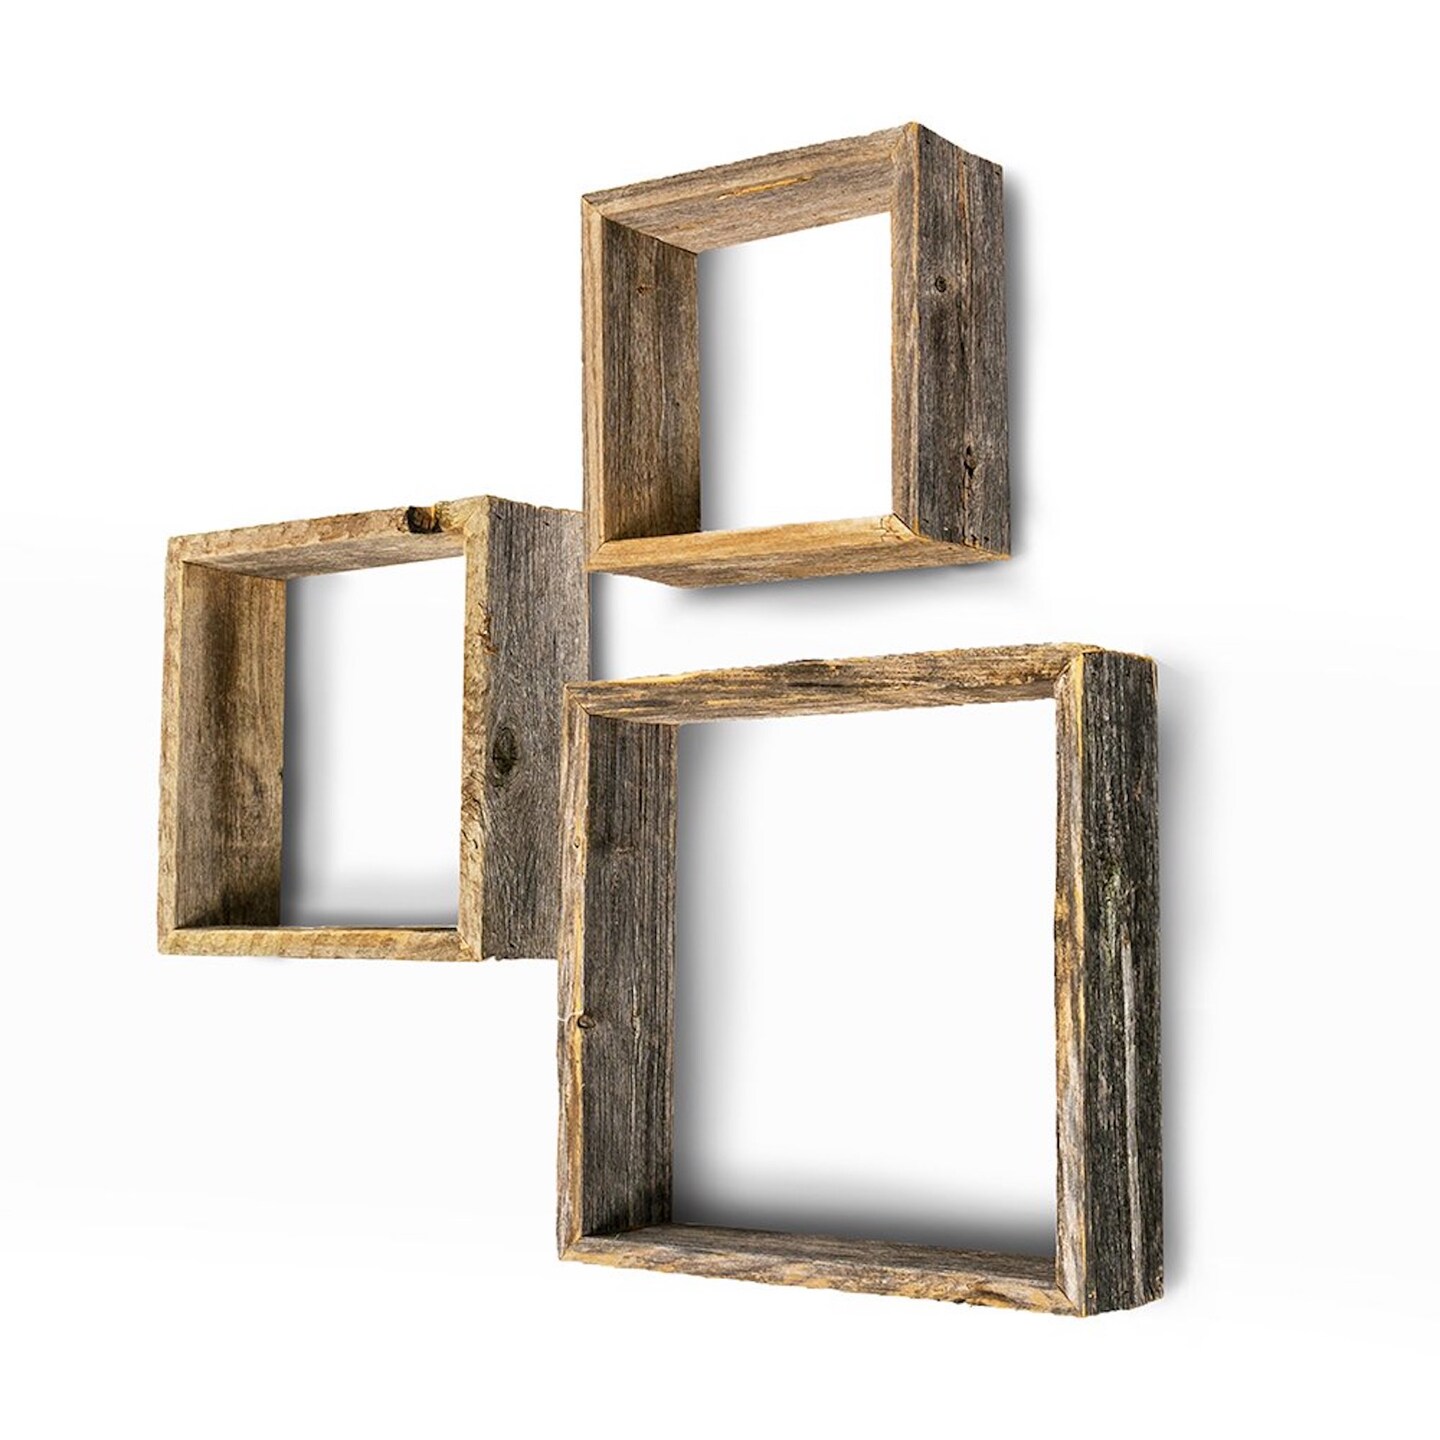 Rustic Farmhouse Reclaimed Wooden Open Square Wall Shelves (Set of 3)